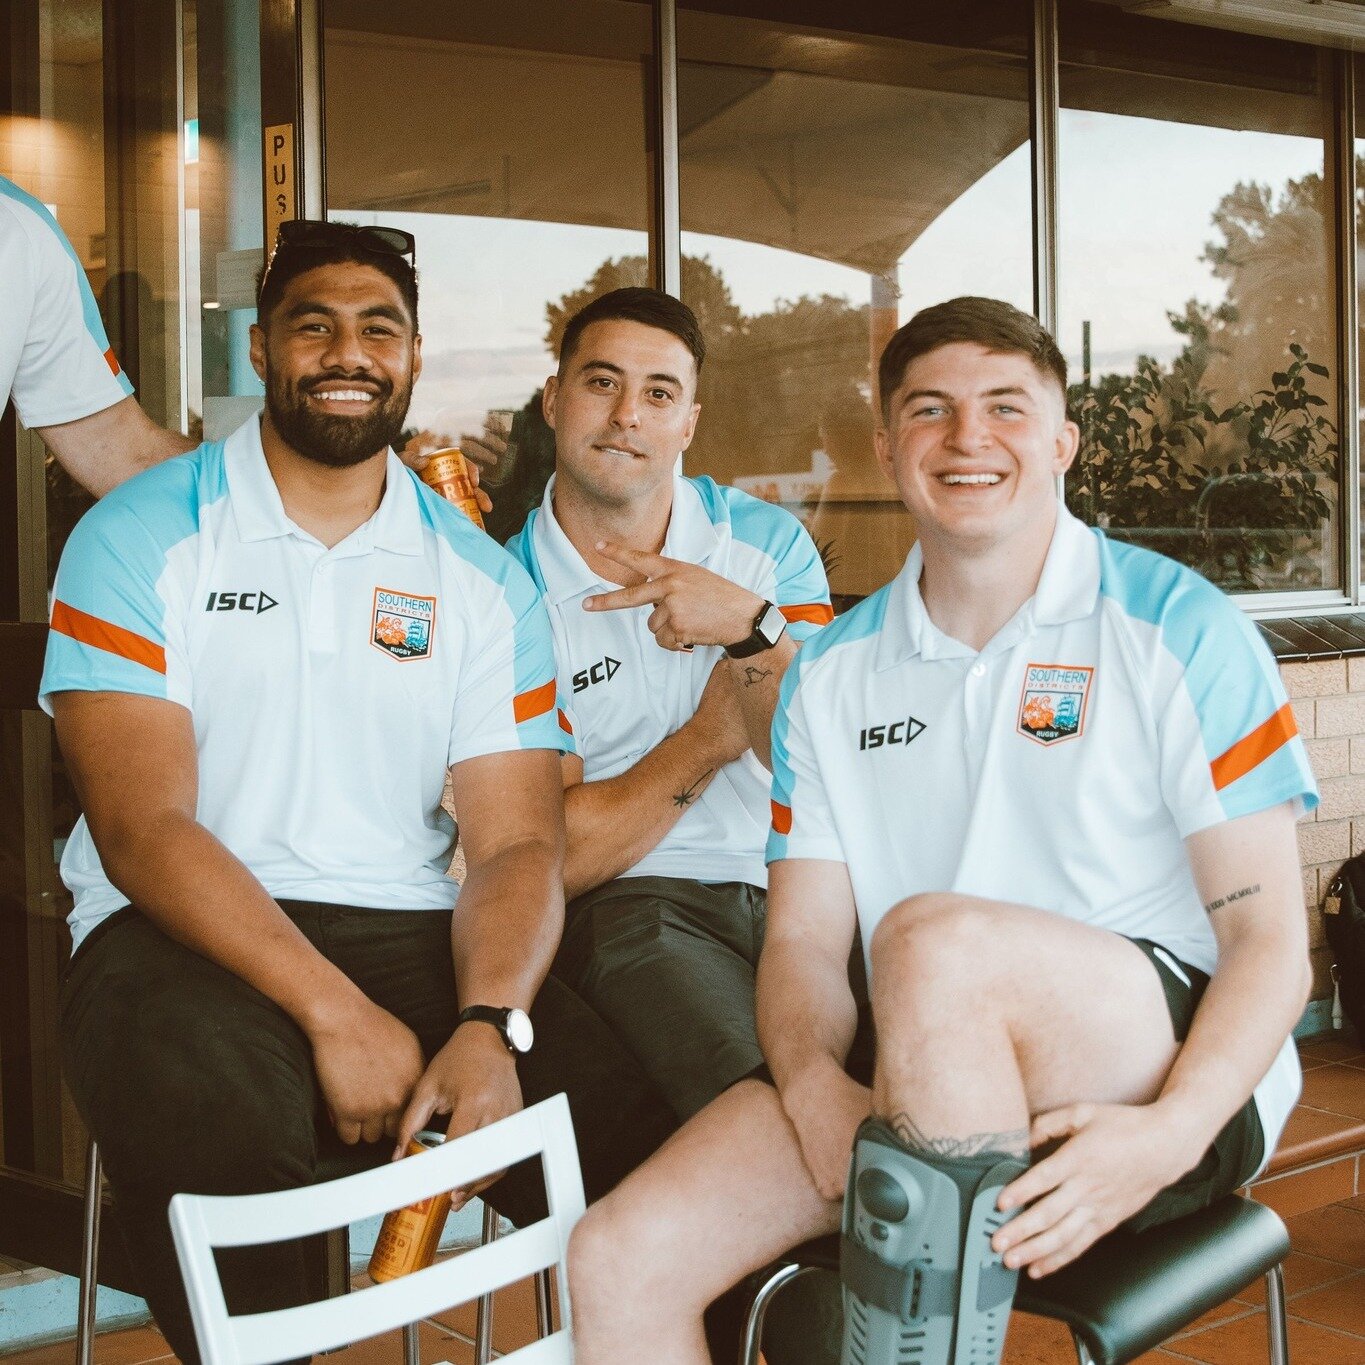 Time for some &quot;Team Bonding&quot; on the Greenfields Balcony

Come grab a beer, cocktail or glass of wine this weekend with the Lads FieldSide!

📷 @czestyphotography 

#footy #team #fun